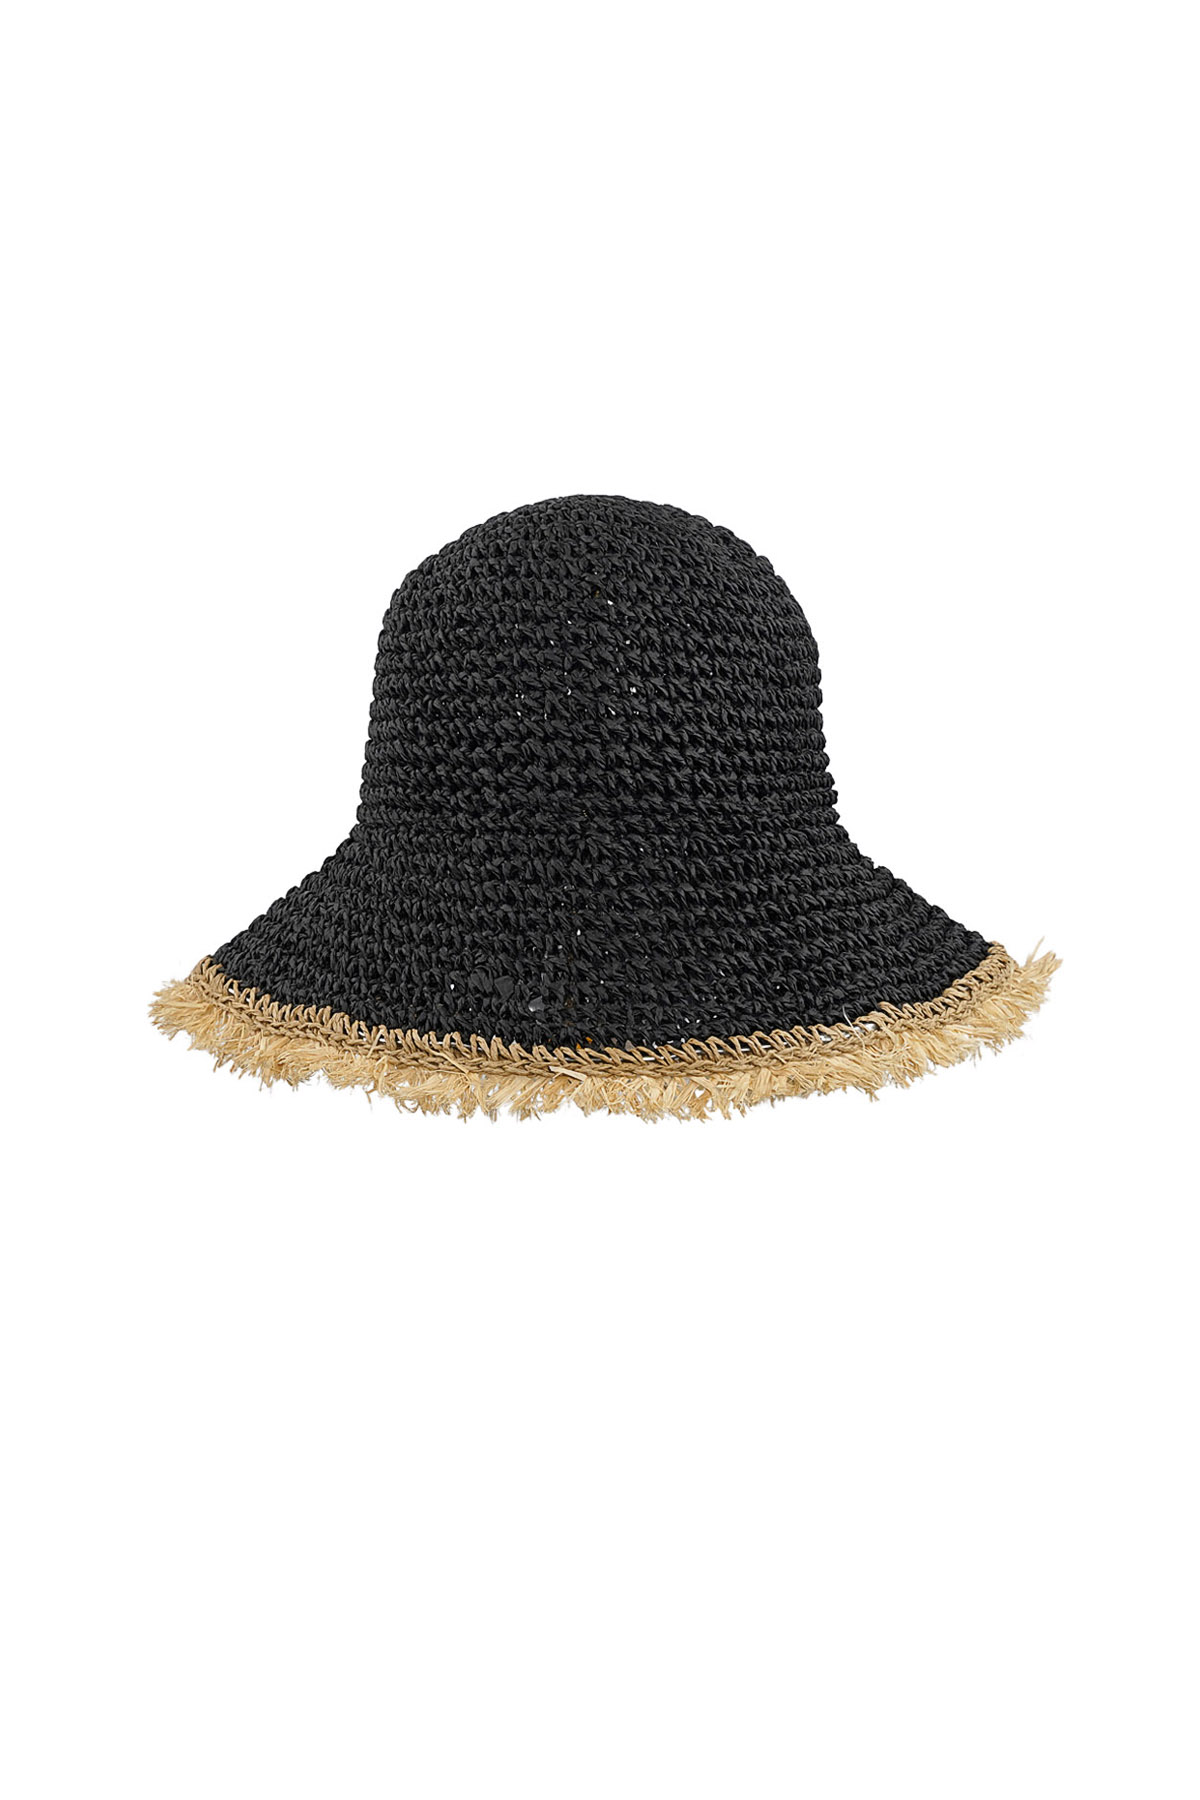 Hat with colored brim - black 